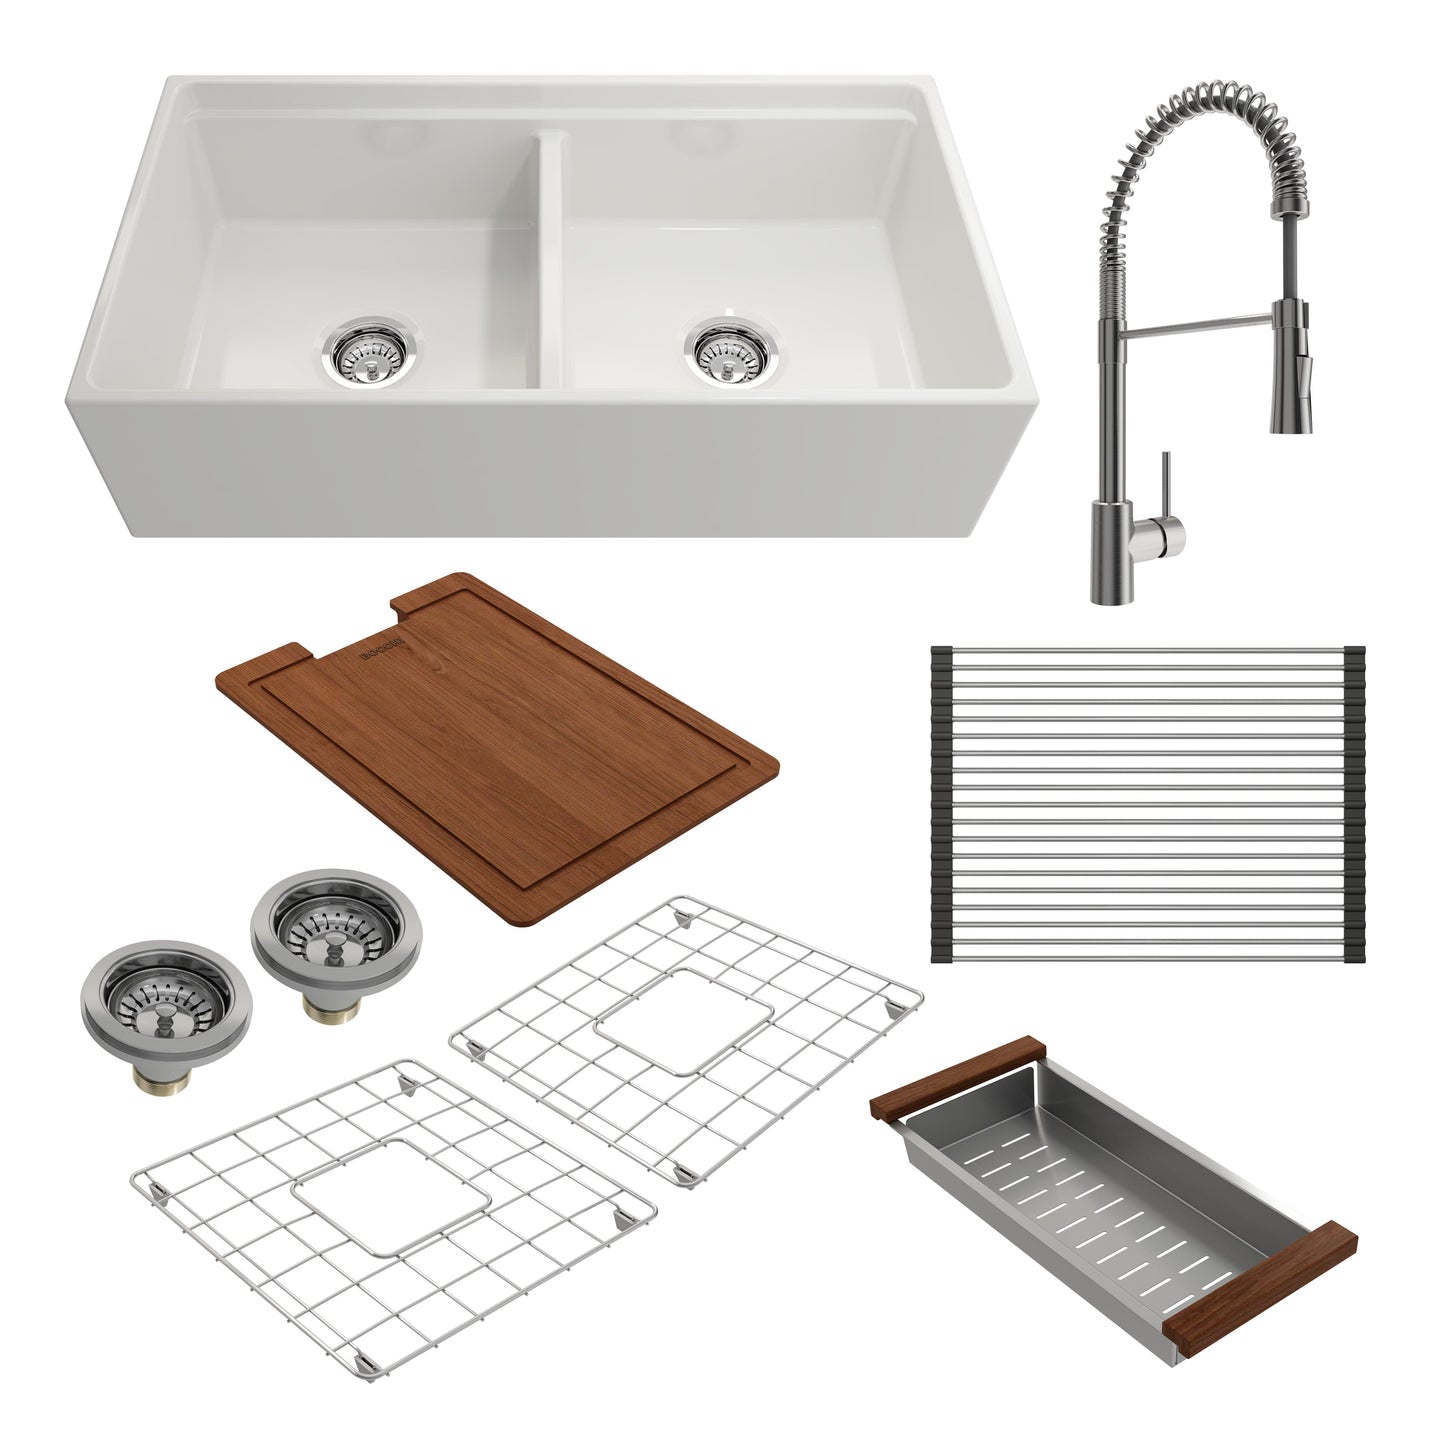 BOCCHI CONTEMPO 36" Fireclay Kitchen Sink with Integrated Work Station & Accessories with Livenza 2.0 Faucet